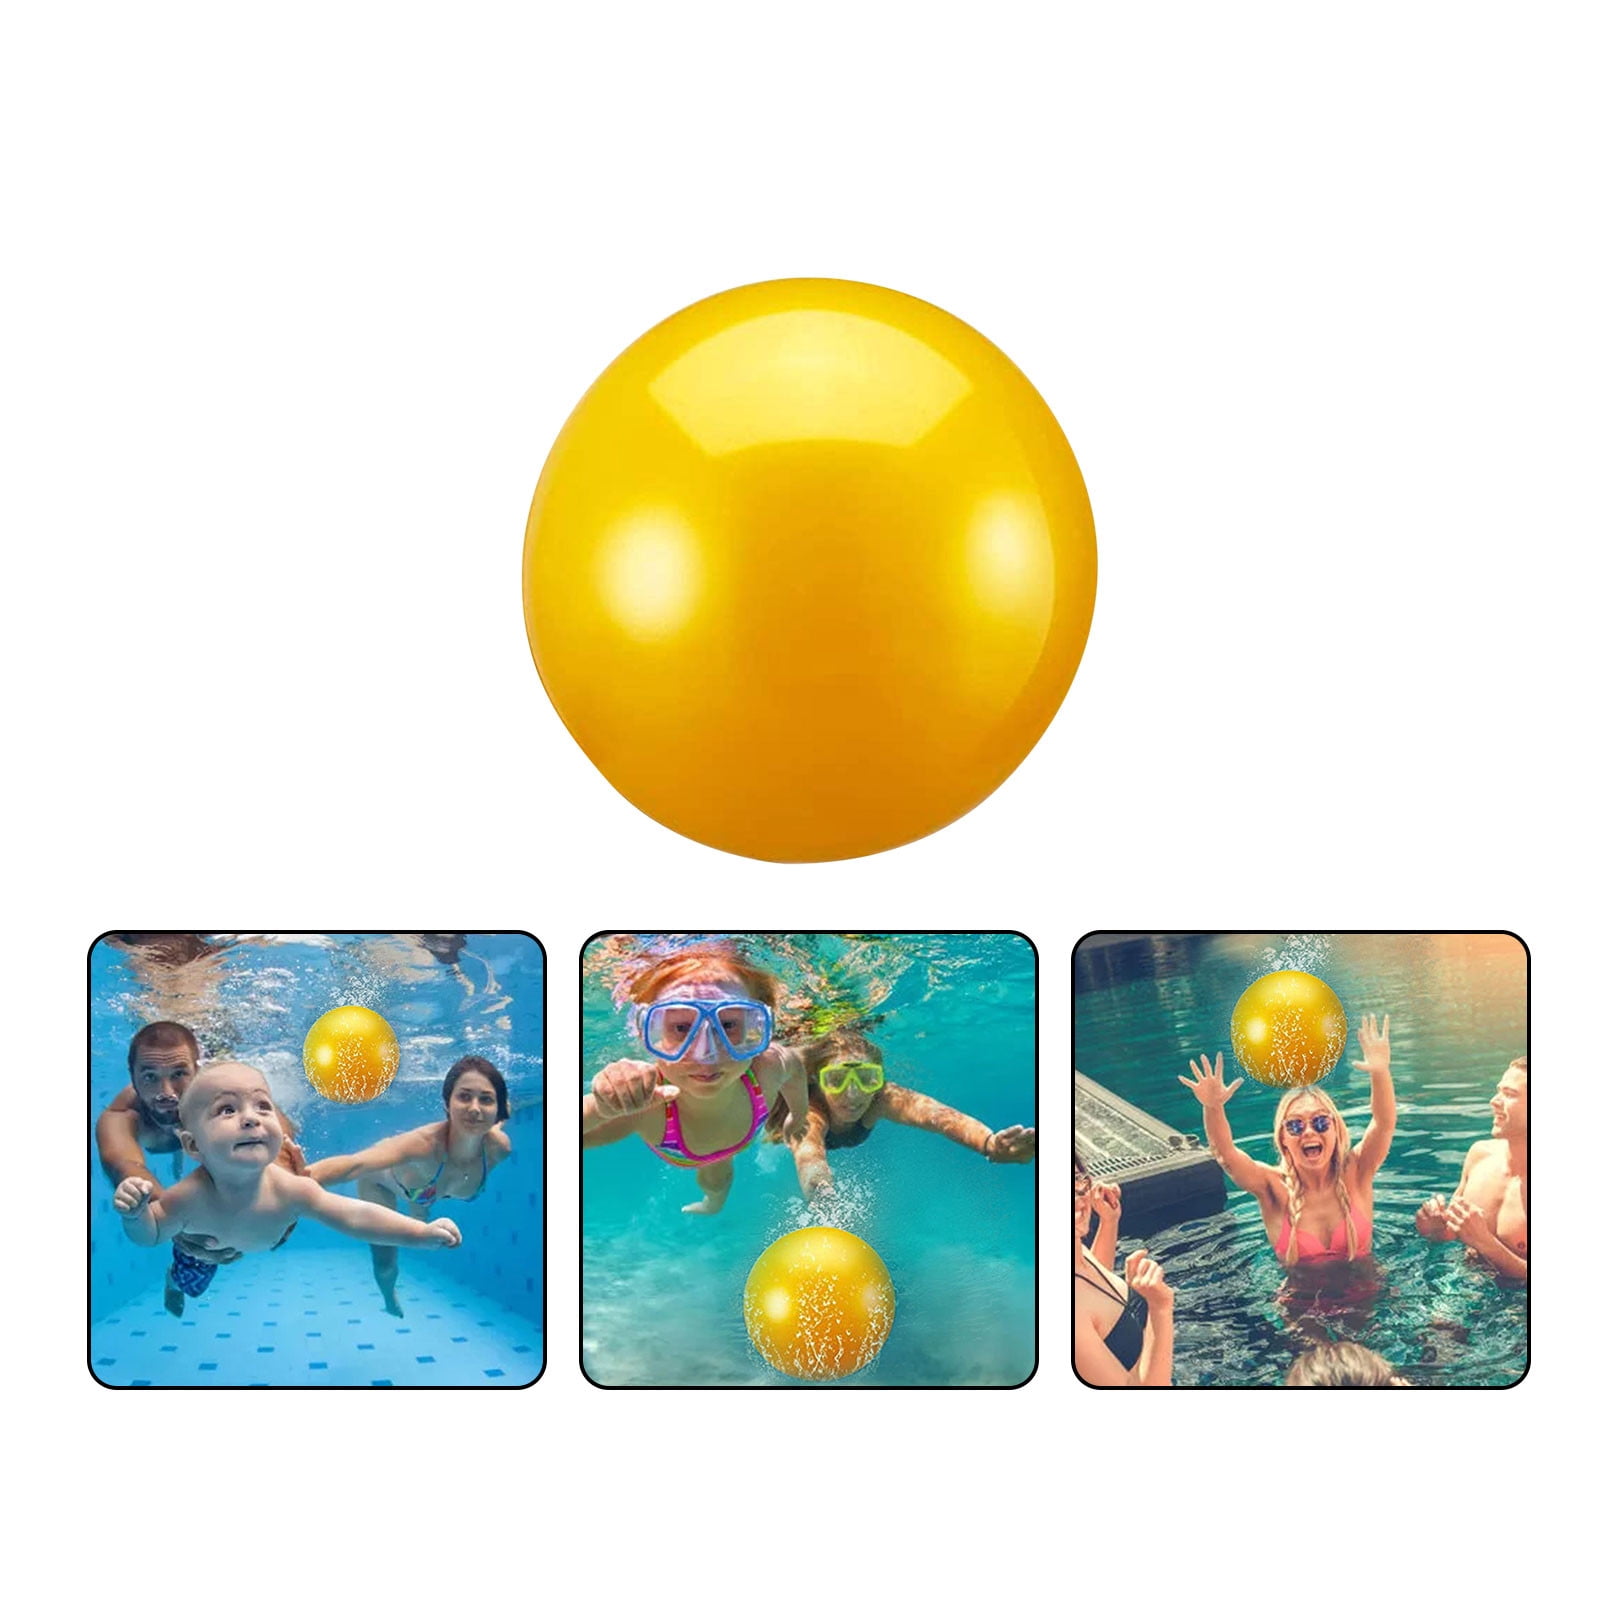 Details about   HABA Bathtub Ball Track Bathing Bliss Waterslide with 4 Animal Balls 